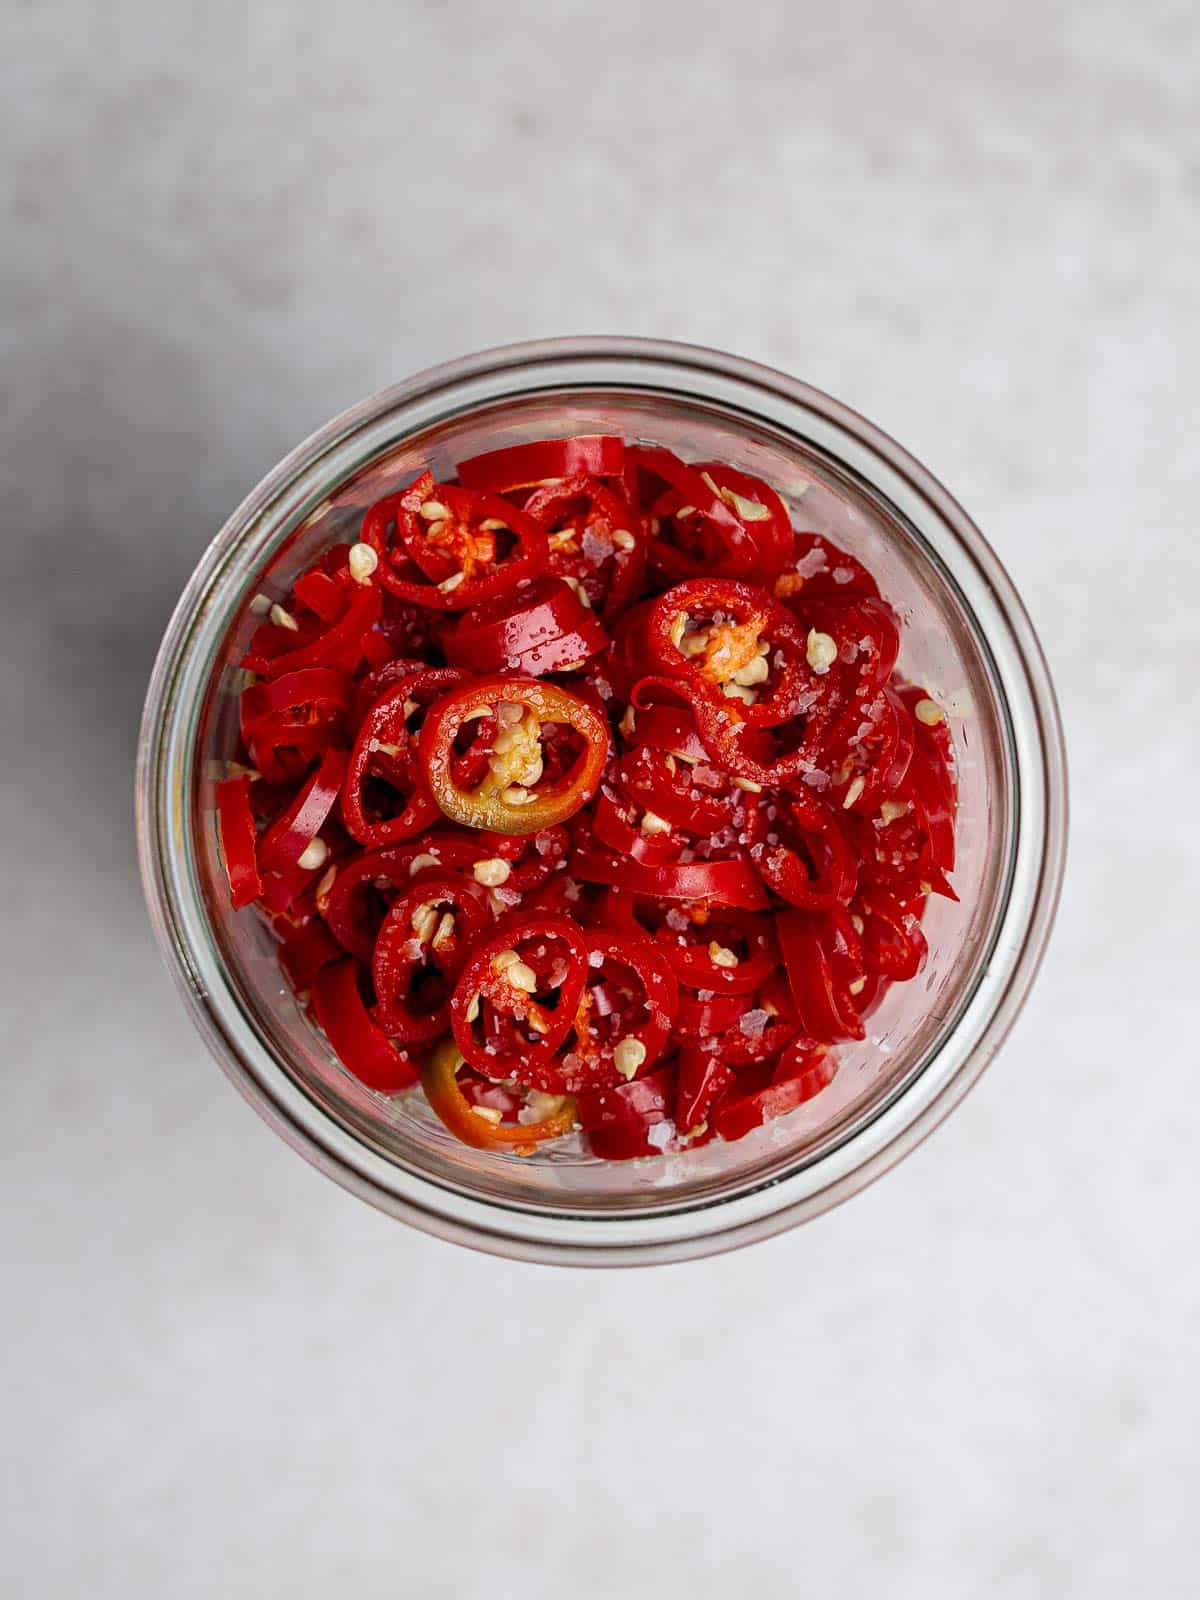 A jar of salted peppers.